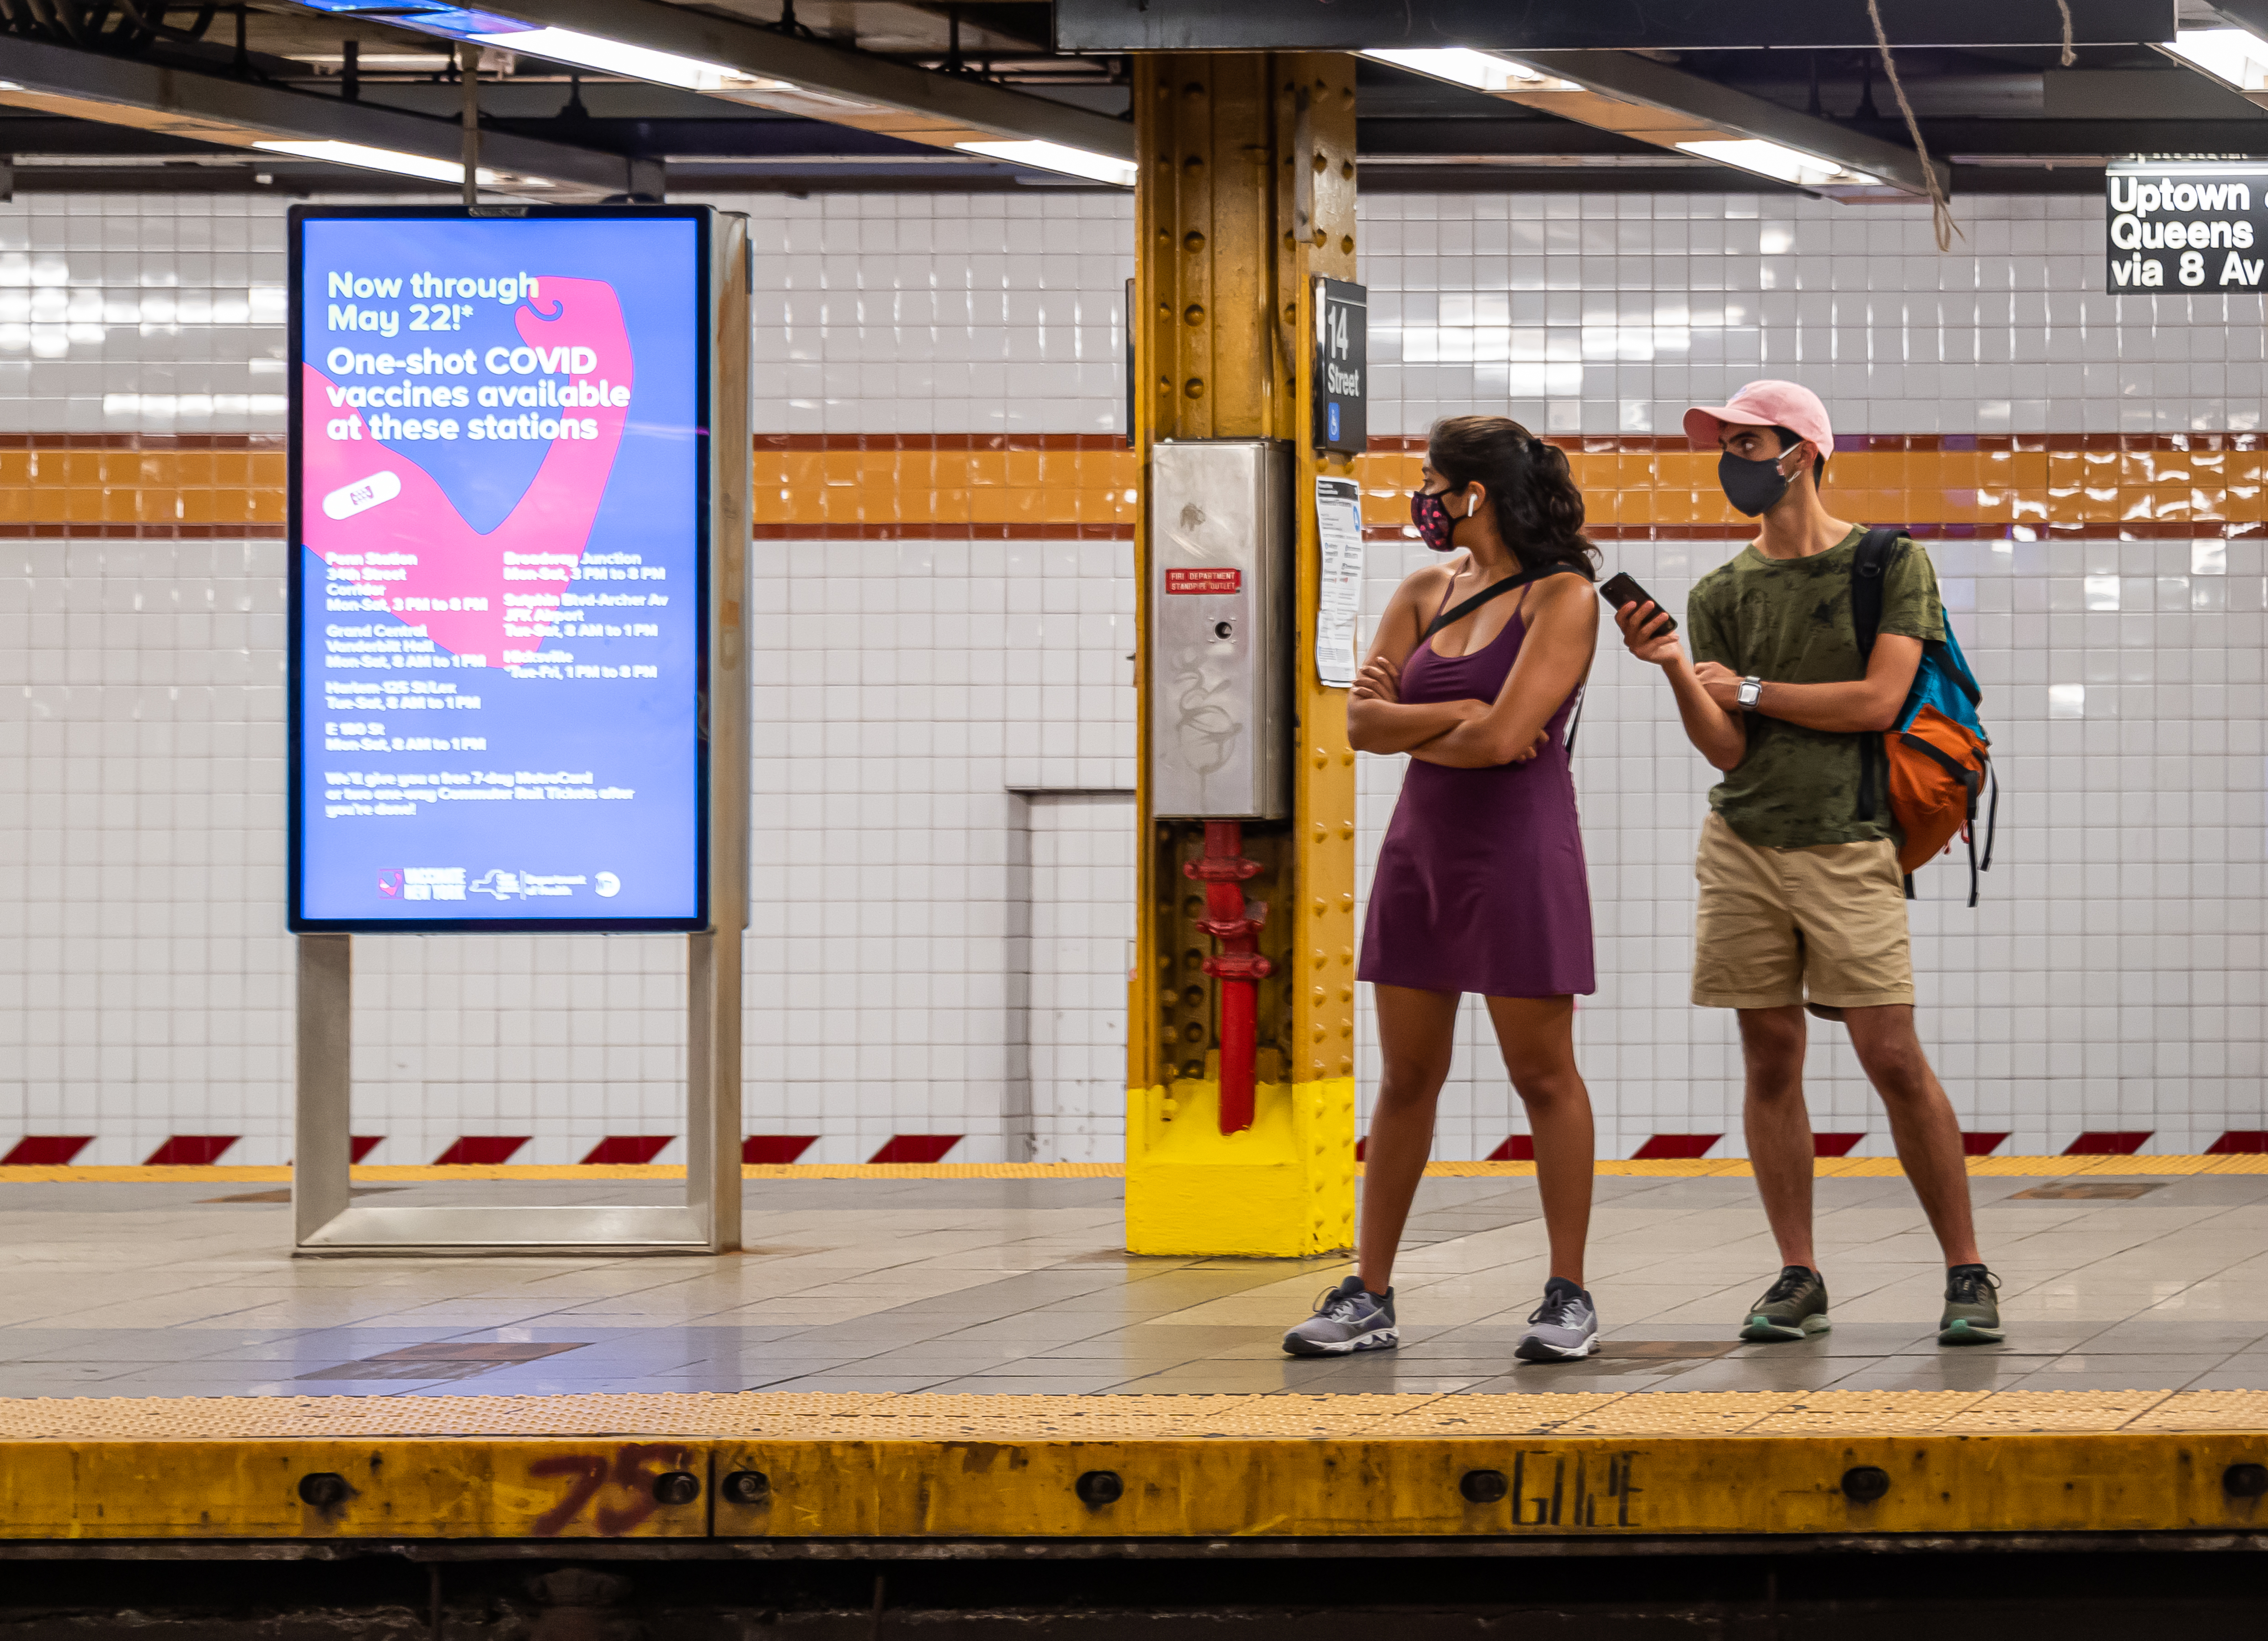 Two people standing on a subway platform.